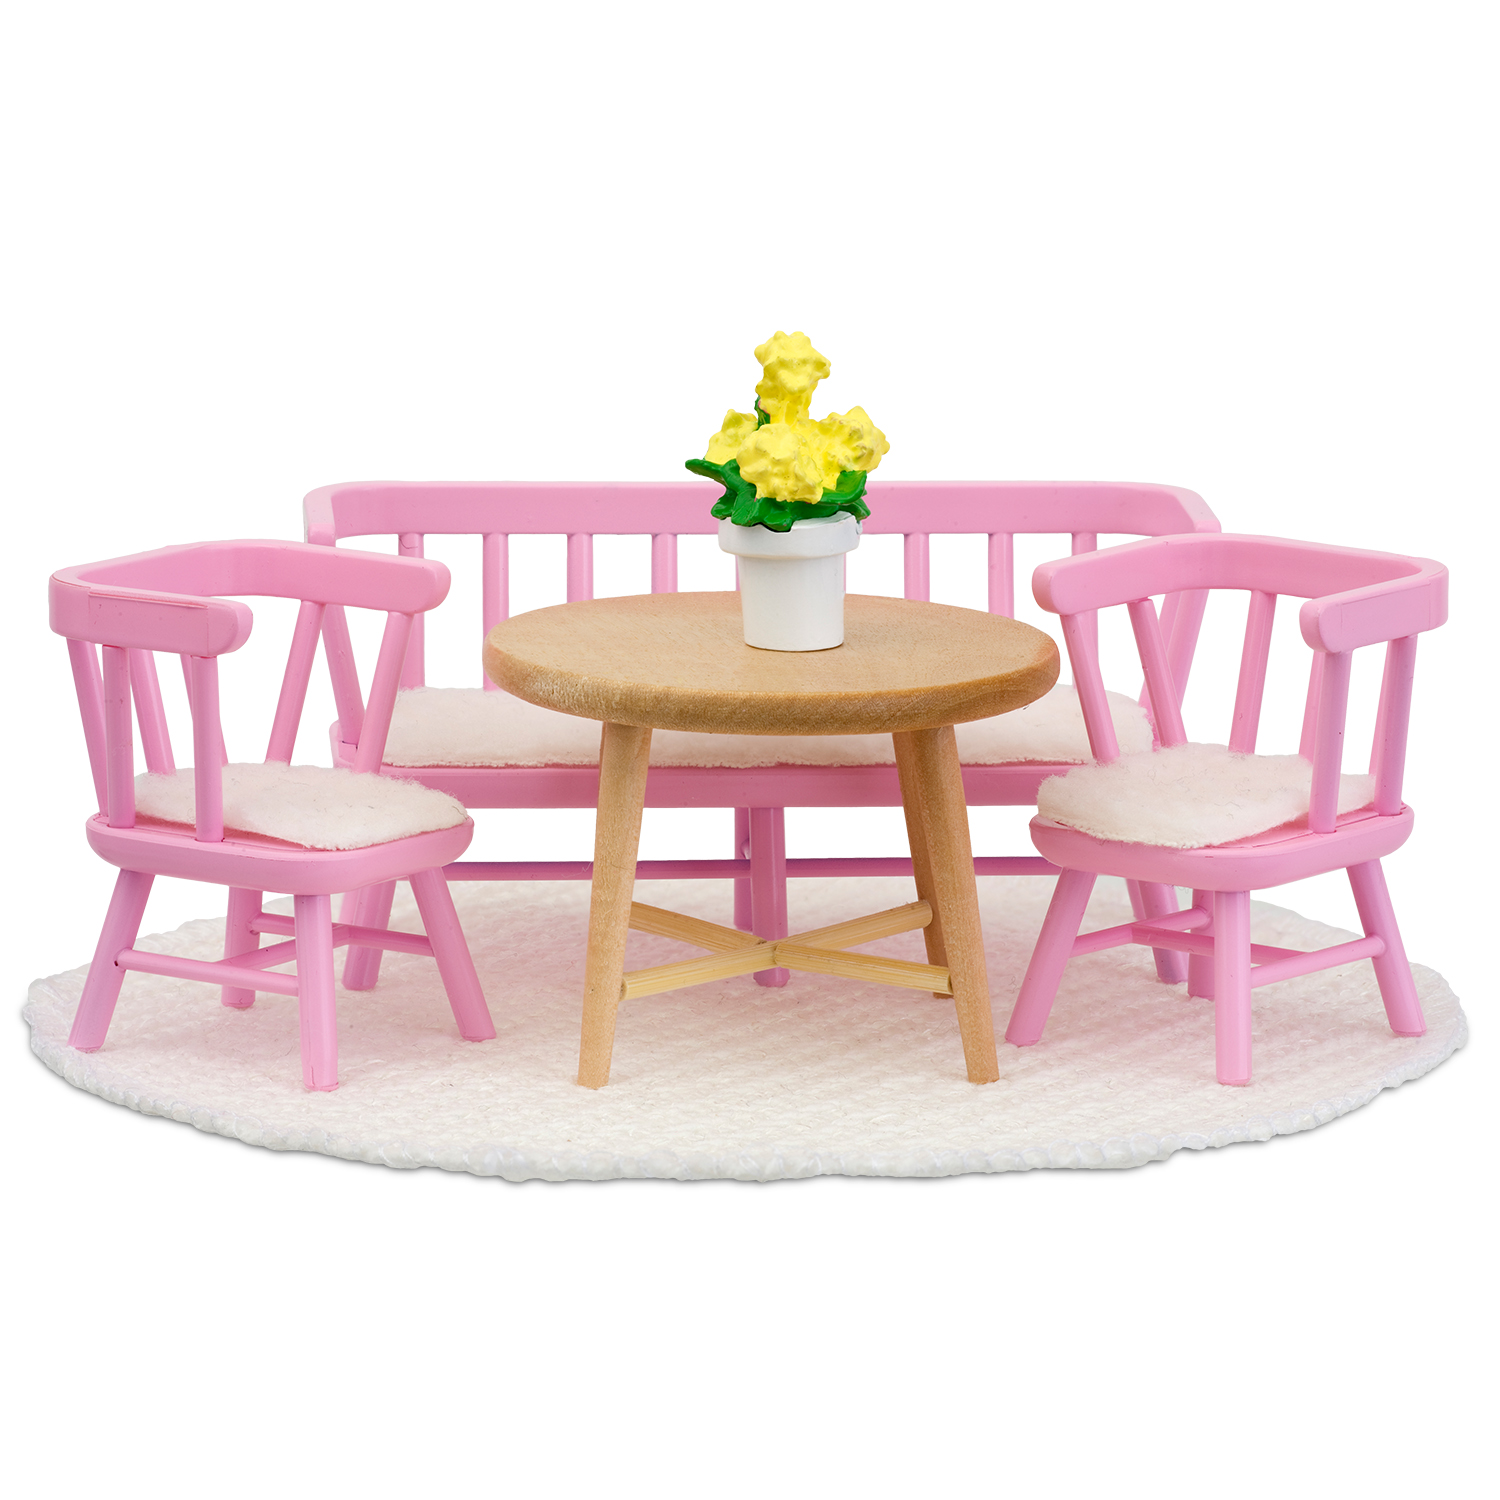 Lundby lundby dollhouse furniture dining table light pink